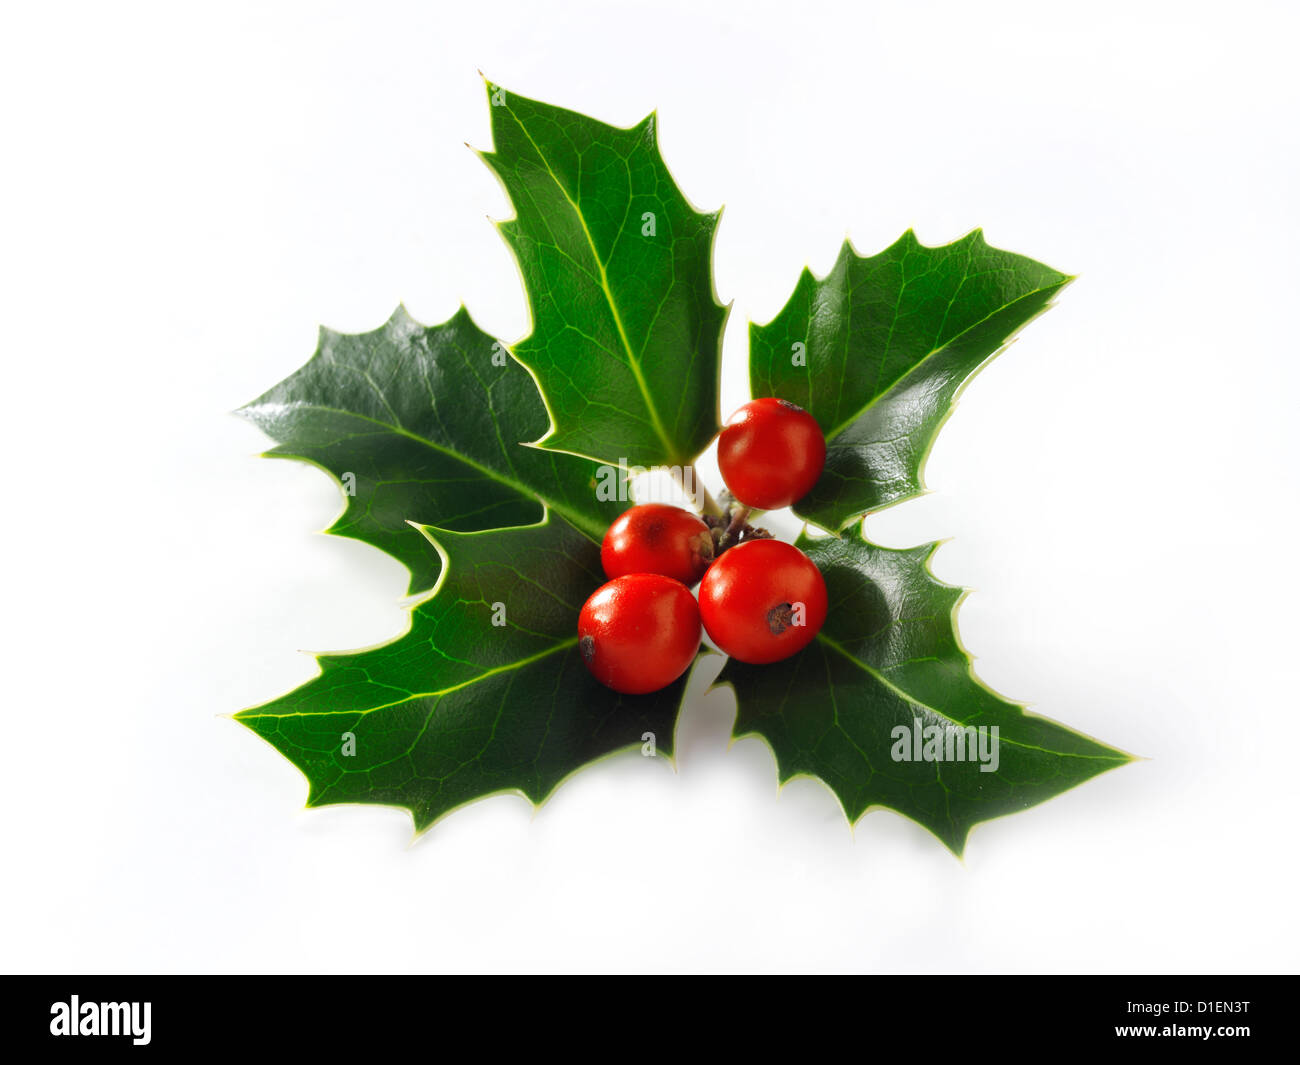 Christmas Holly leaves & berries Stock Photo - Alamy